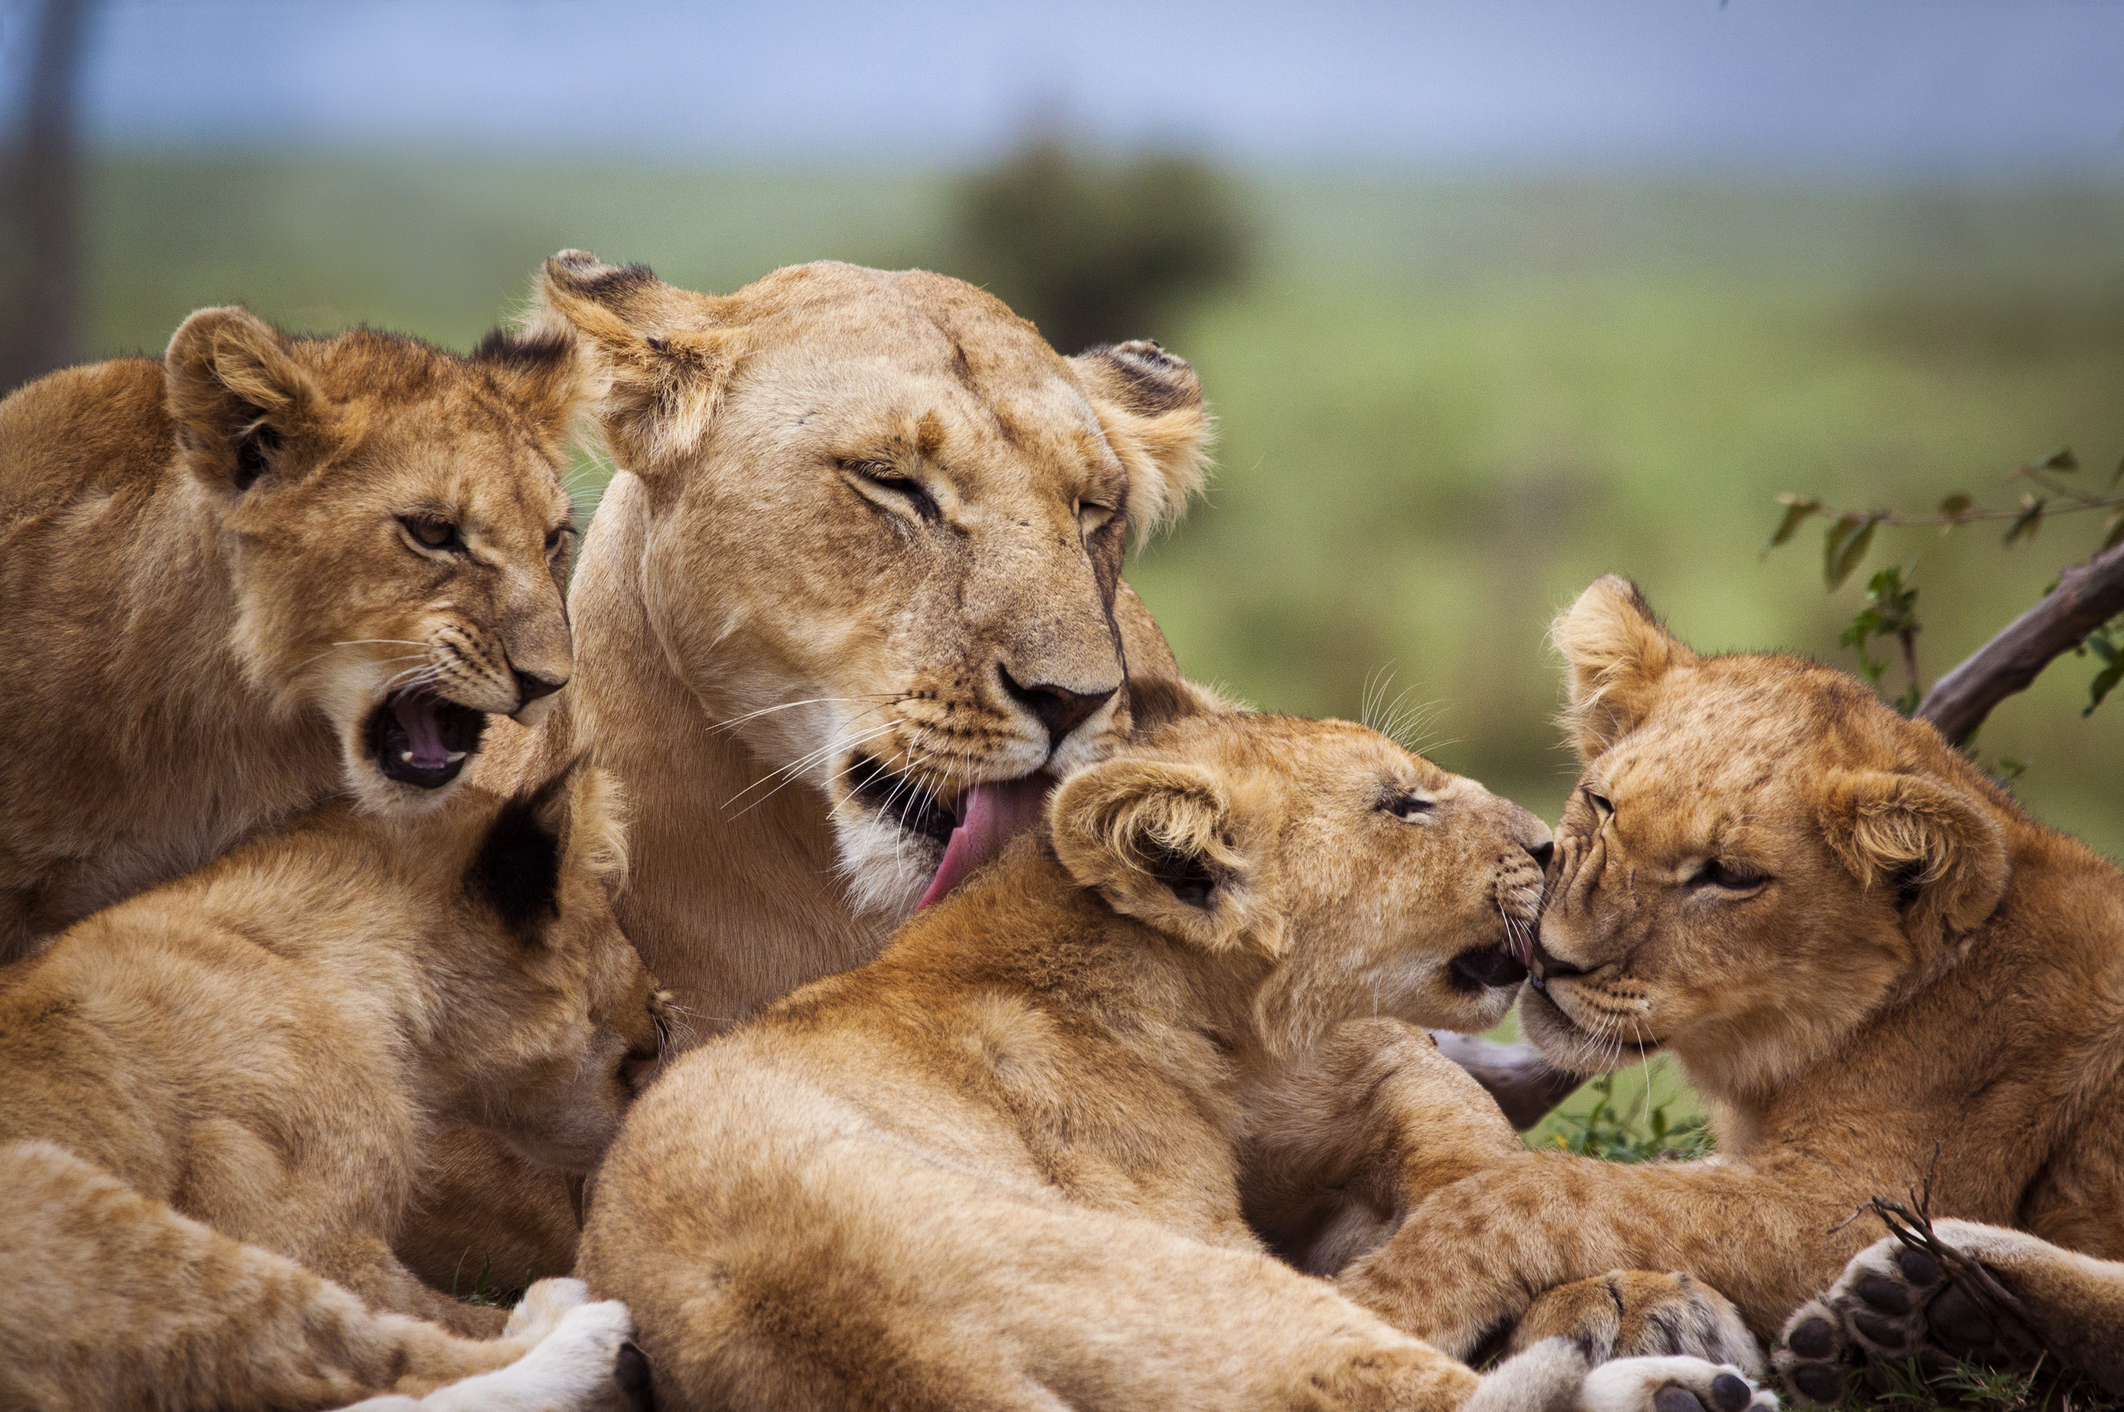 Mother and lion cubs in Kenya